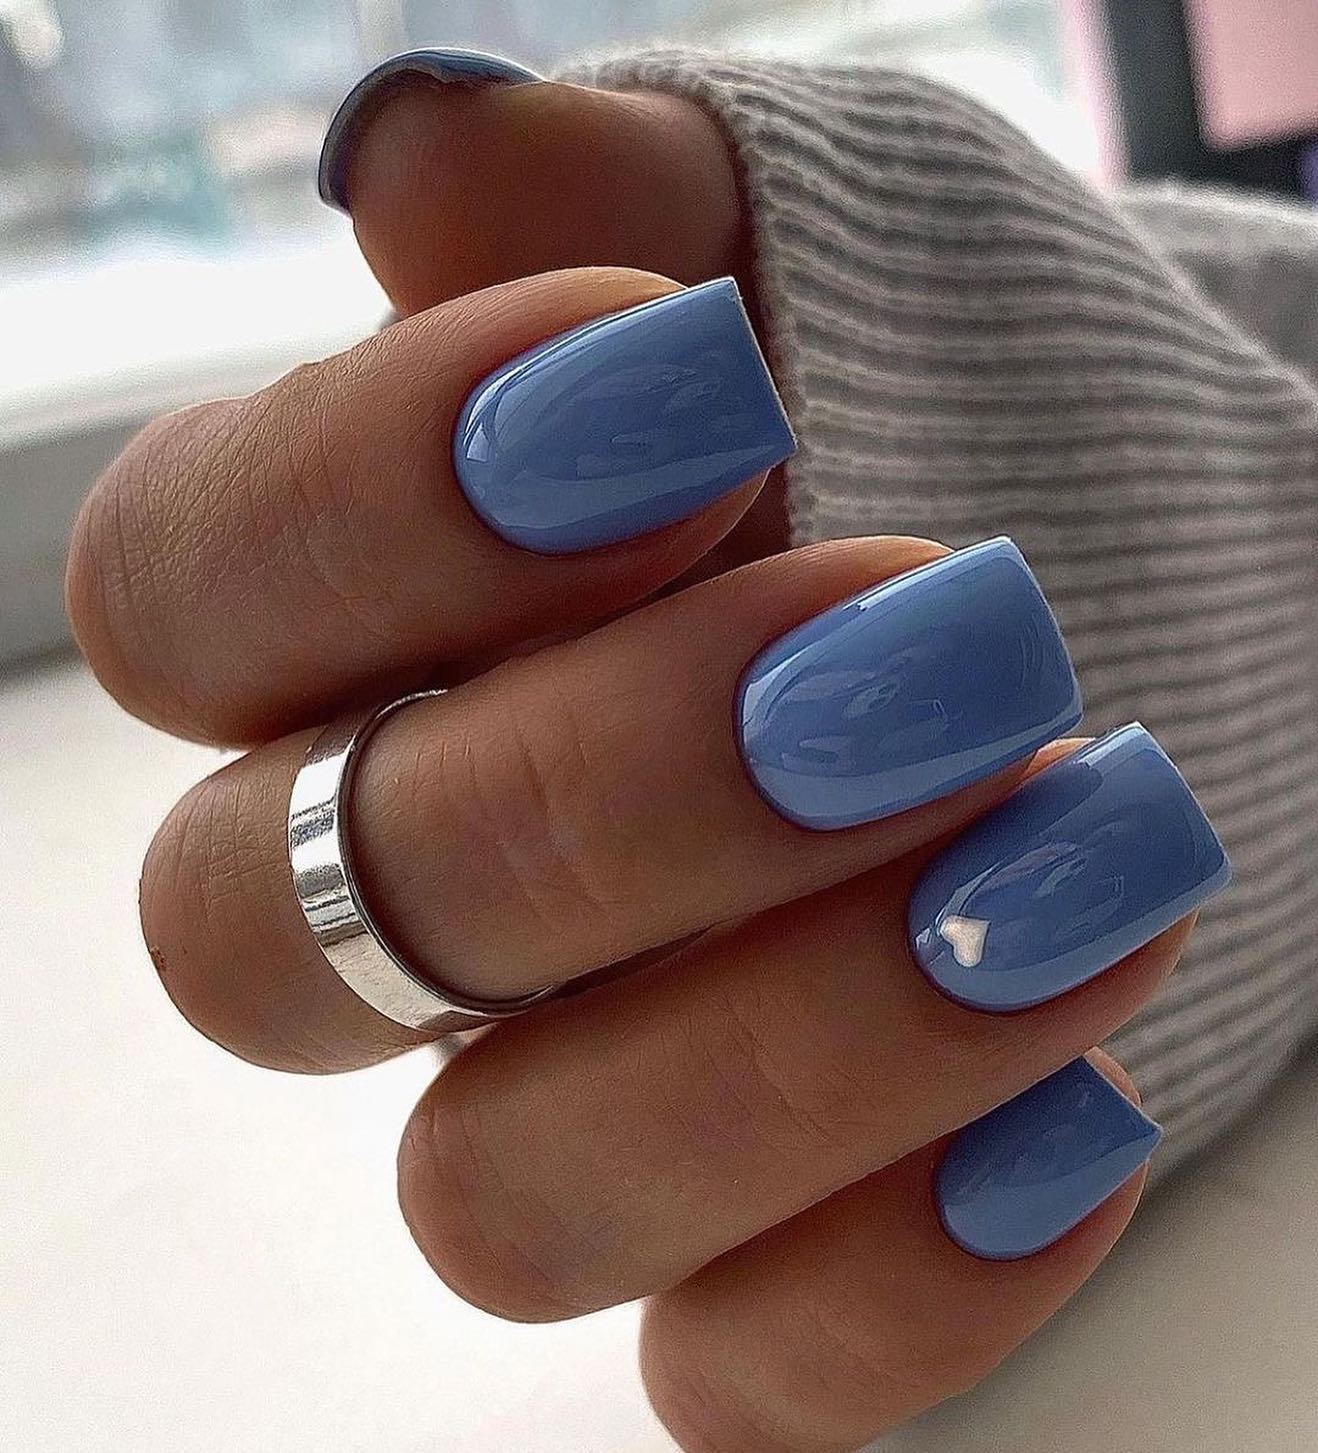 100+ Gorgeous Winter Nail Designs And Ideas images 45